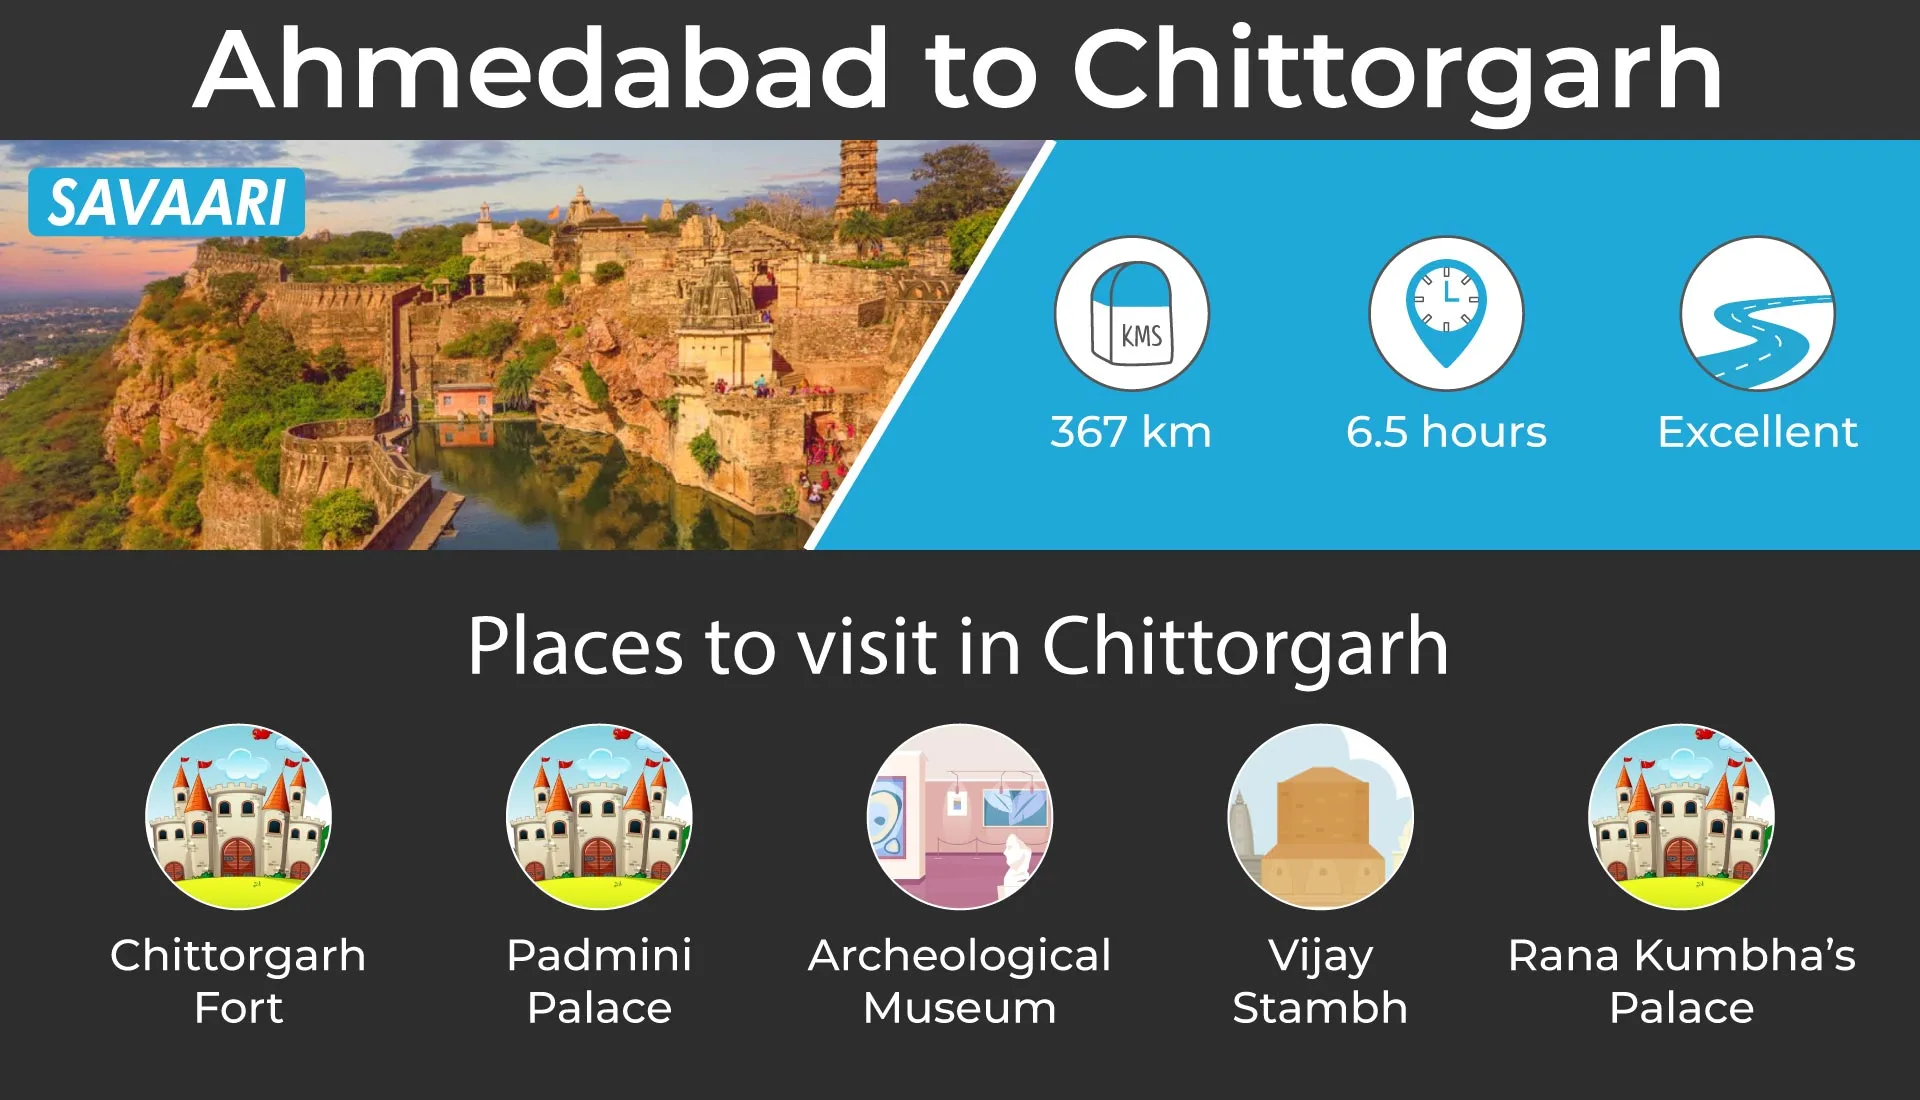 Offbeat places to visit near Ahmedabad - Chittorgarh